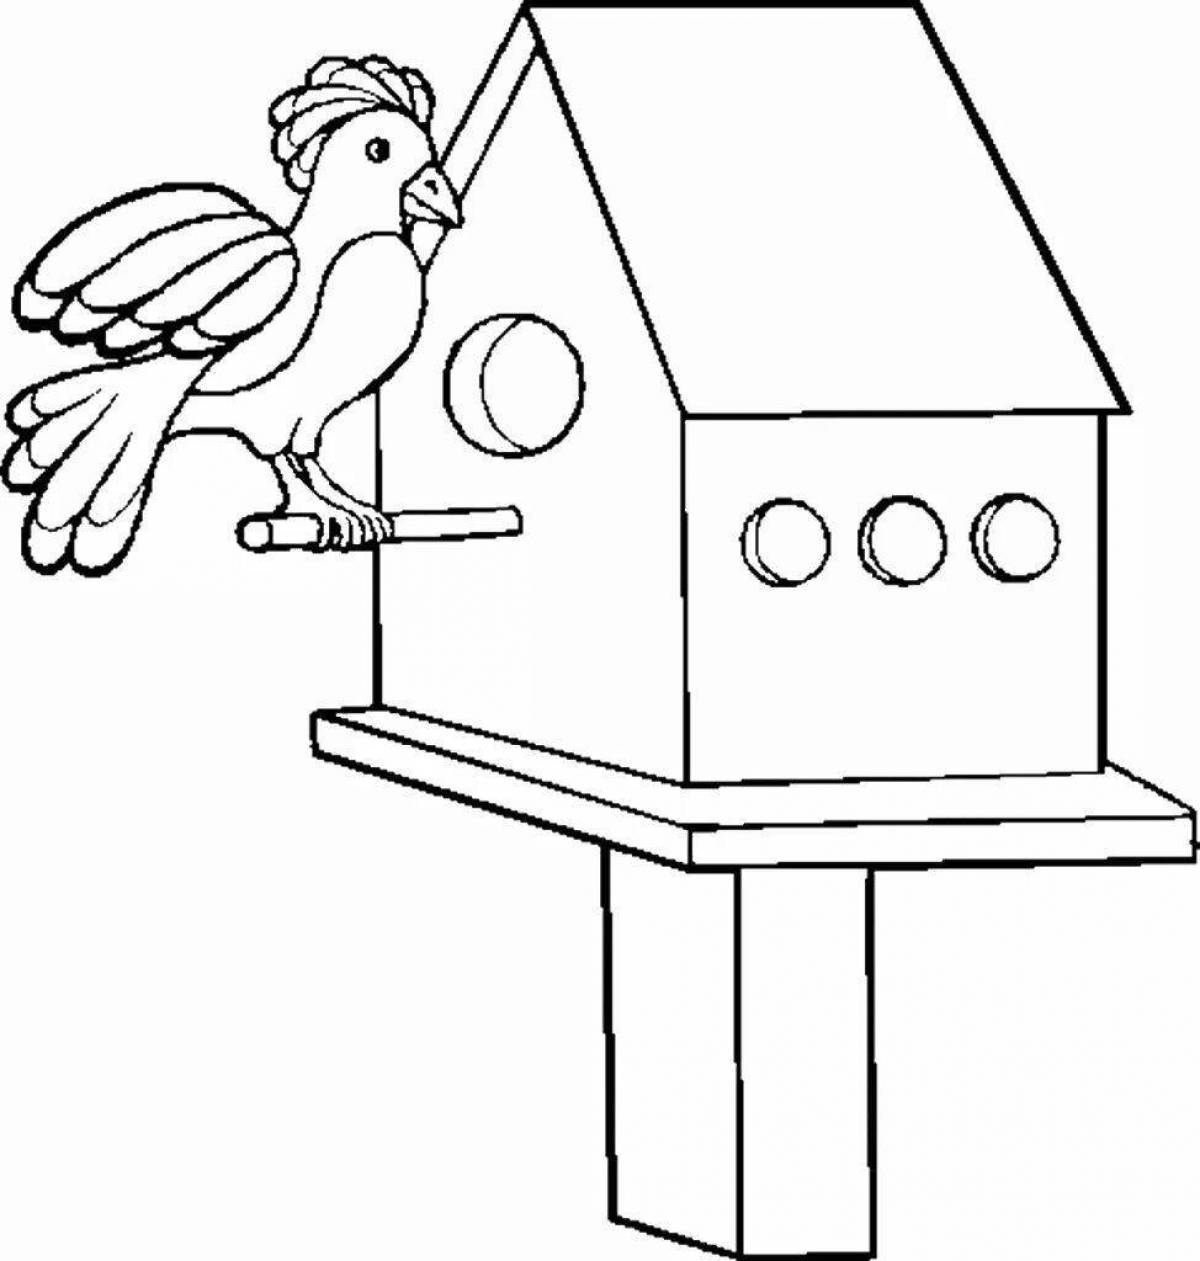 Impressive birdhouse coloring page for 3-4 year old preschoolers